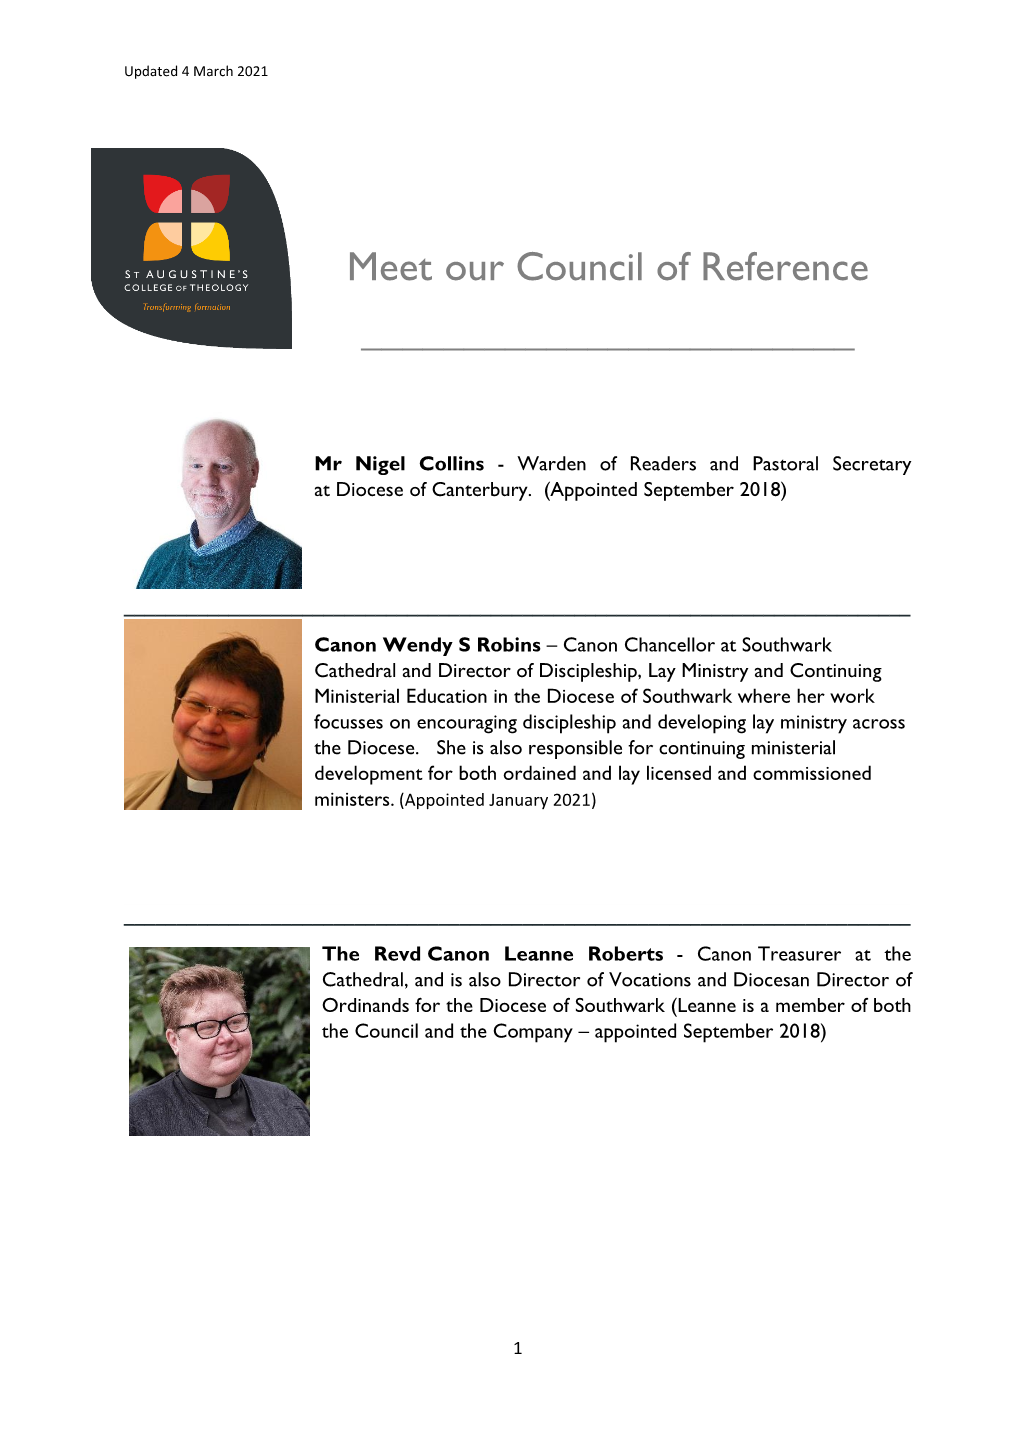 Meet Our Council of Reference 2021